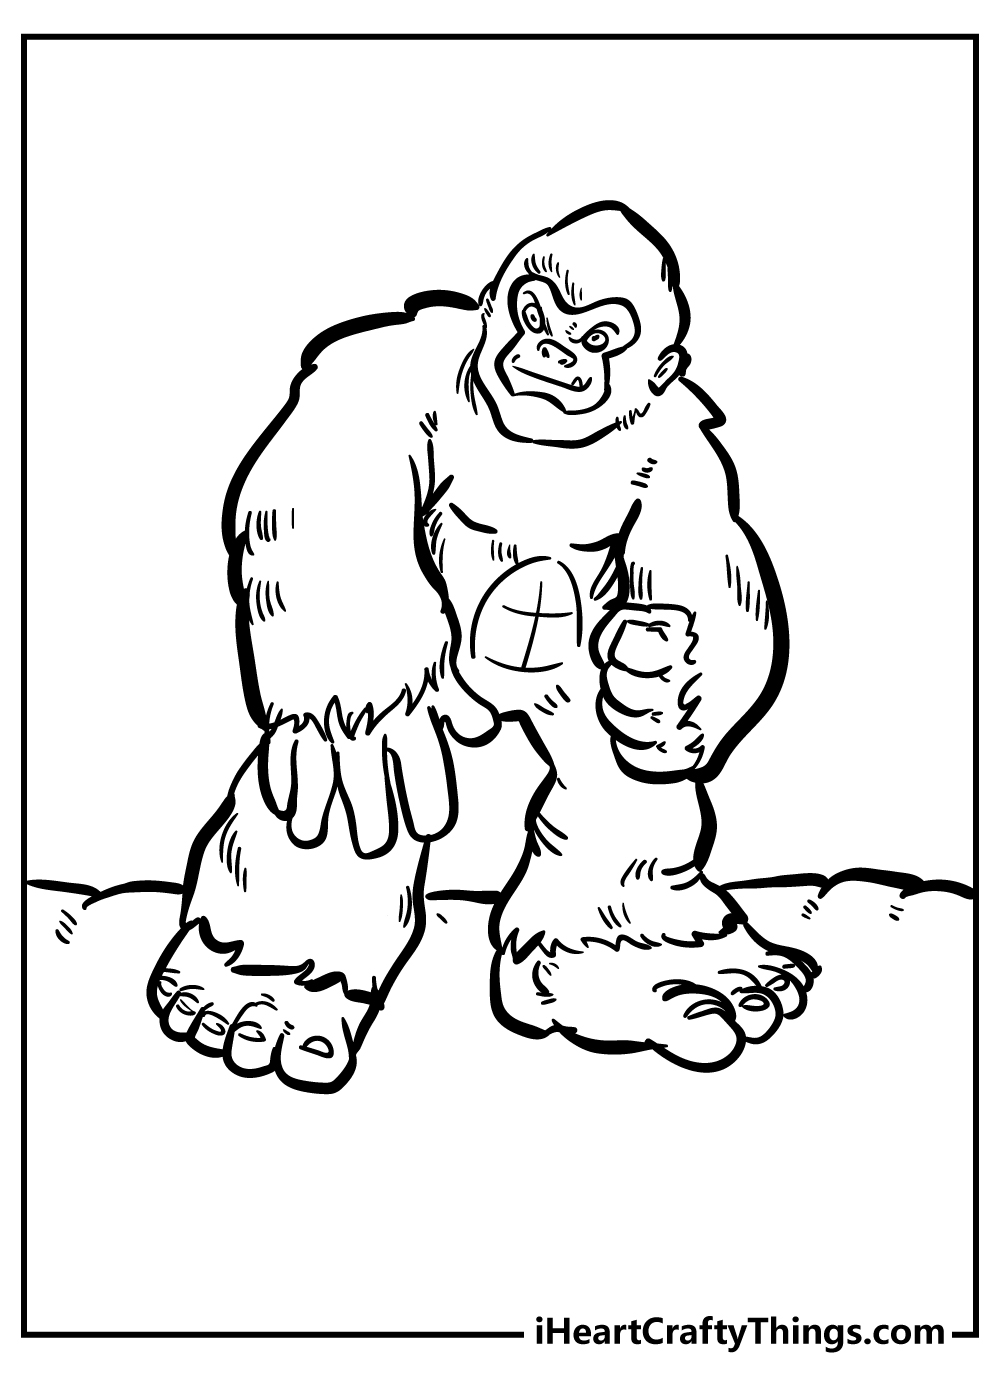 Bigfoot Coloring Pages for preschoolers free printable